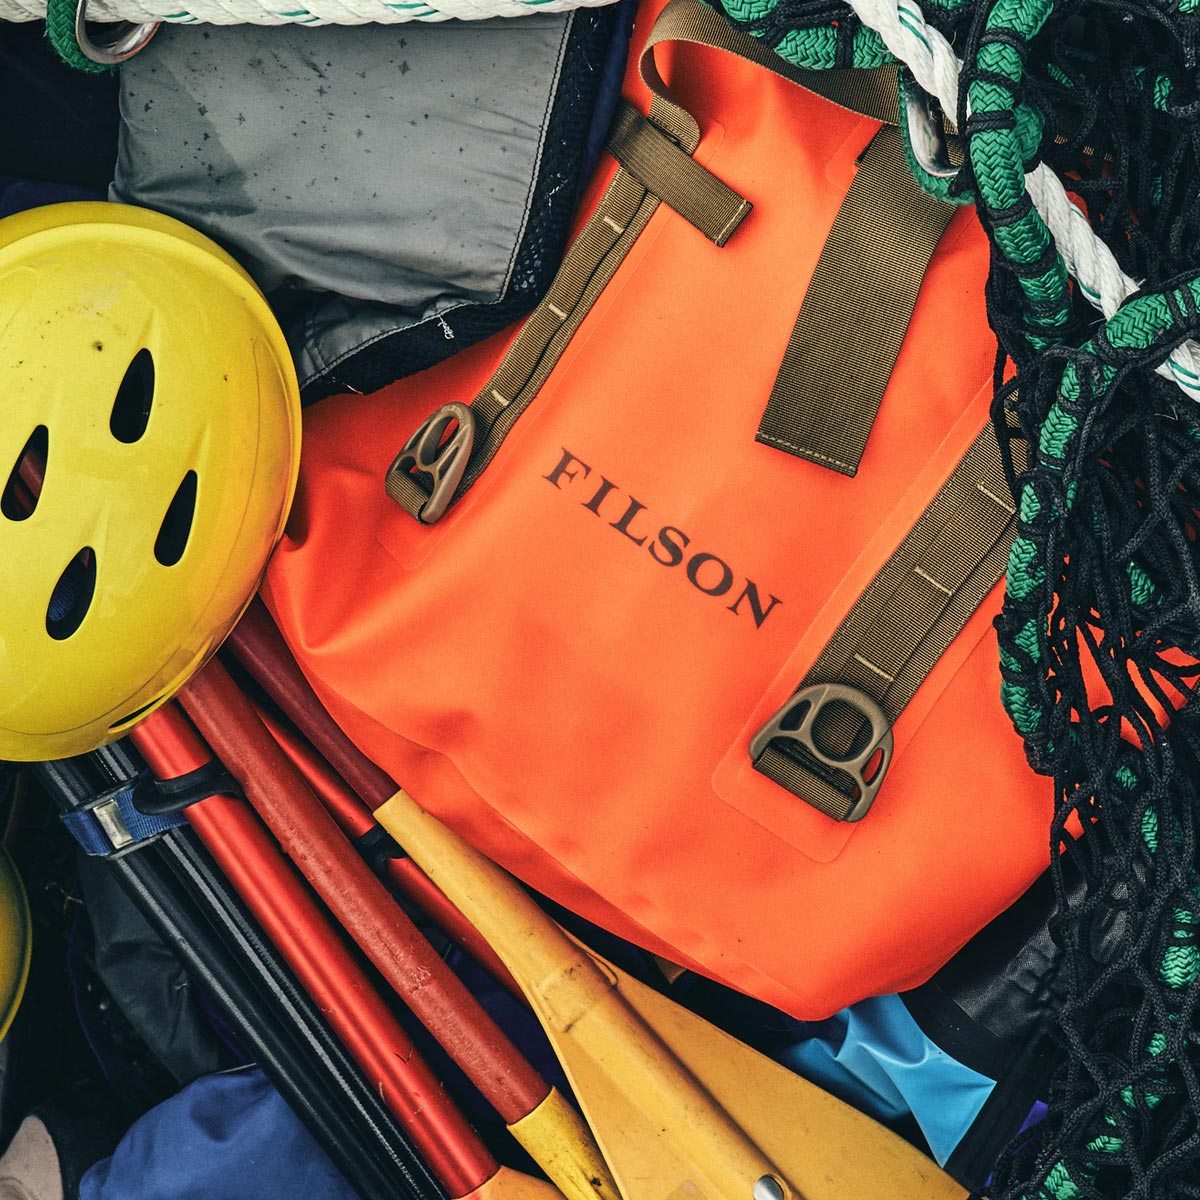 Filson Dry Roll-Top Tote Bag Green, keeps your gear dry in any weather